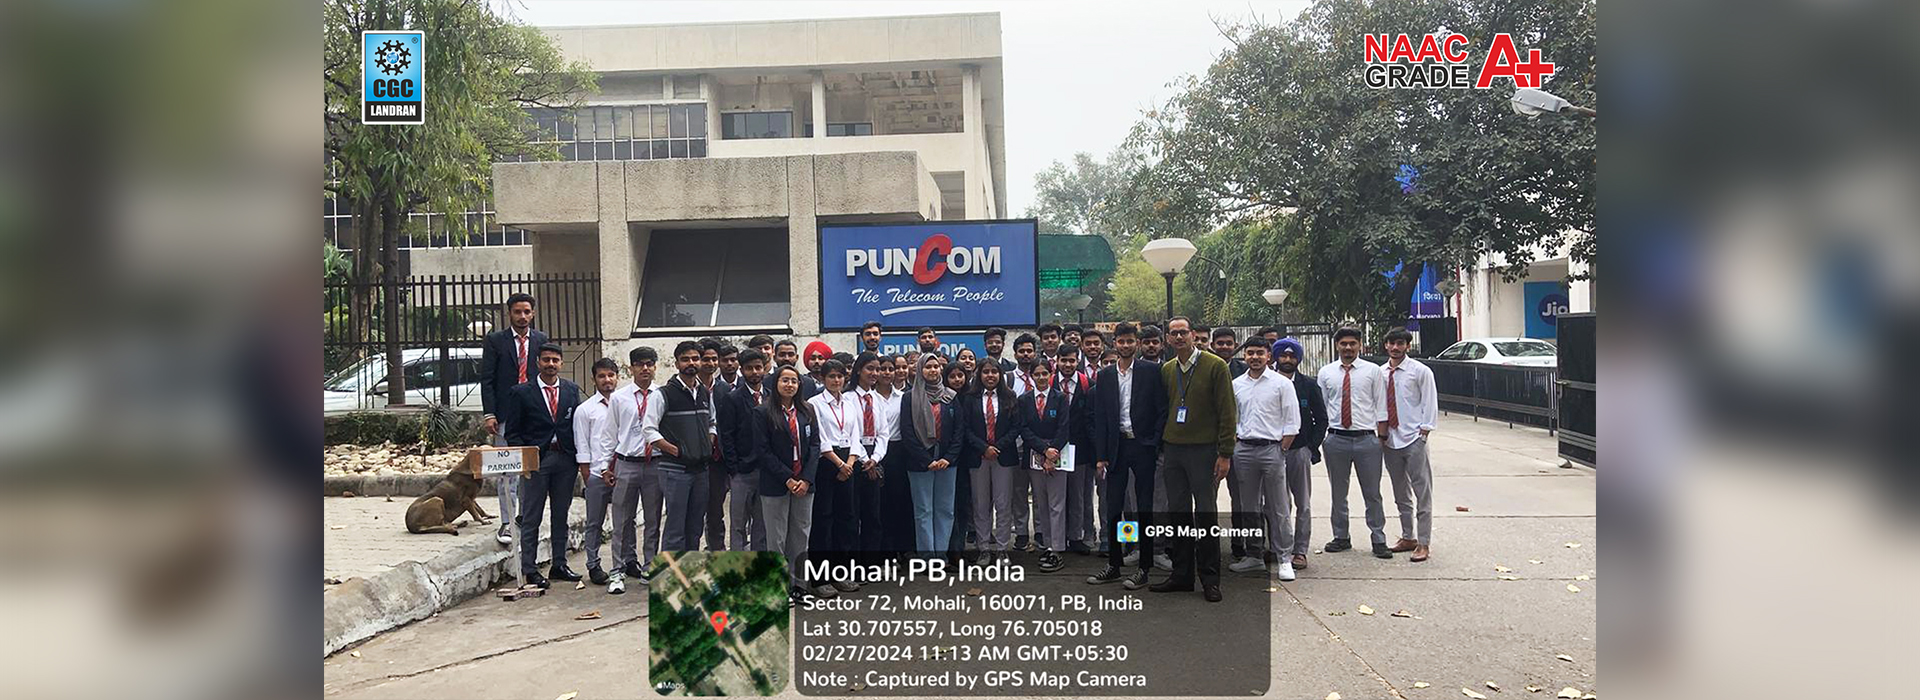 ECE Department Visits PUNCOM: A Glimpse into Telecom Technology and Career Paths 